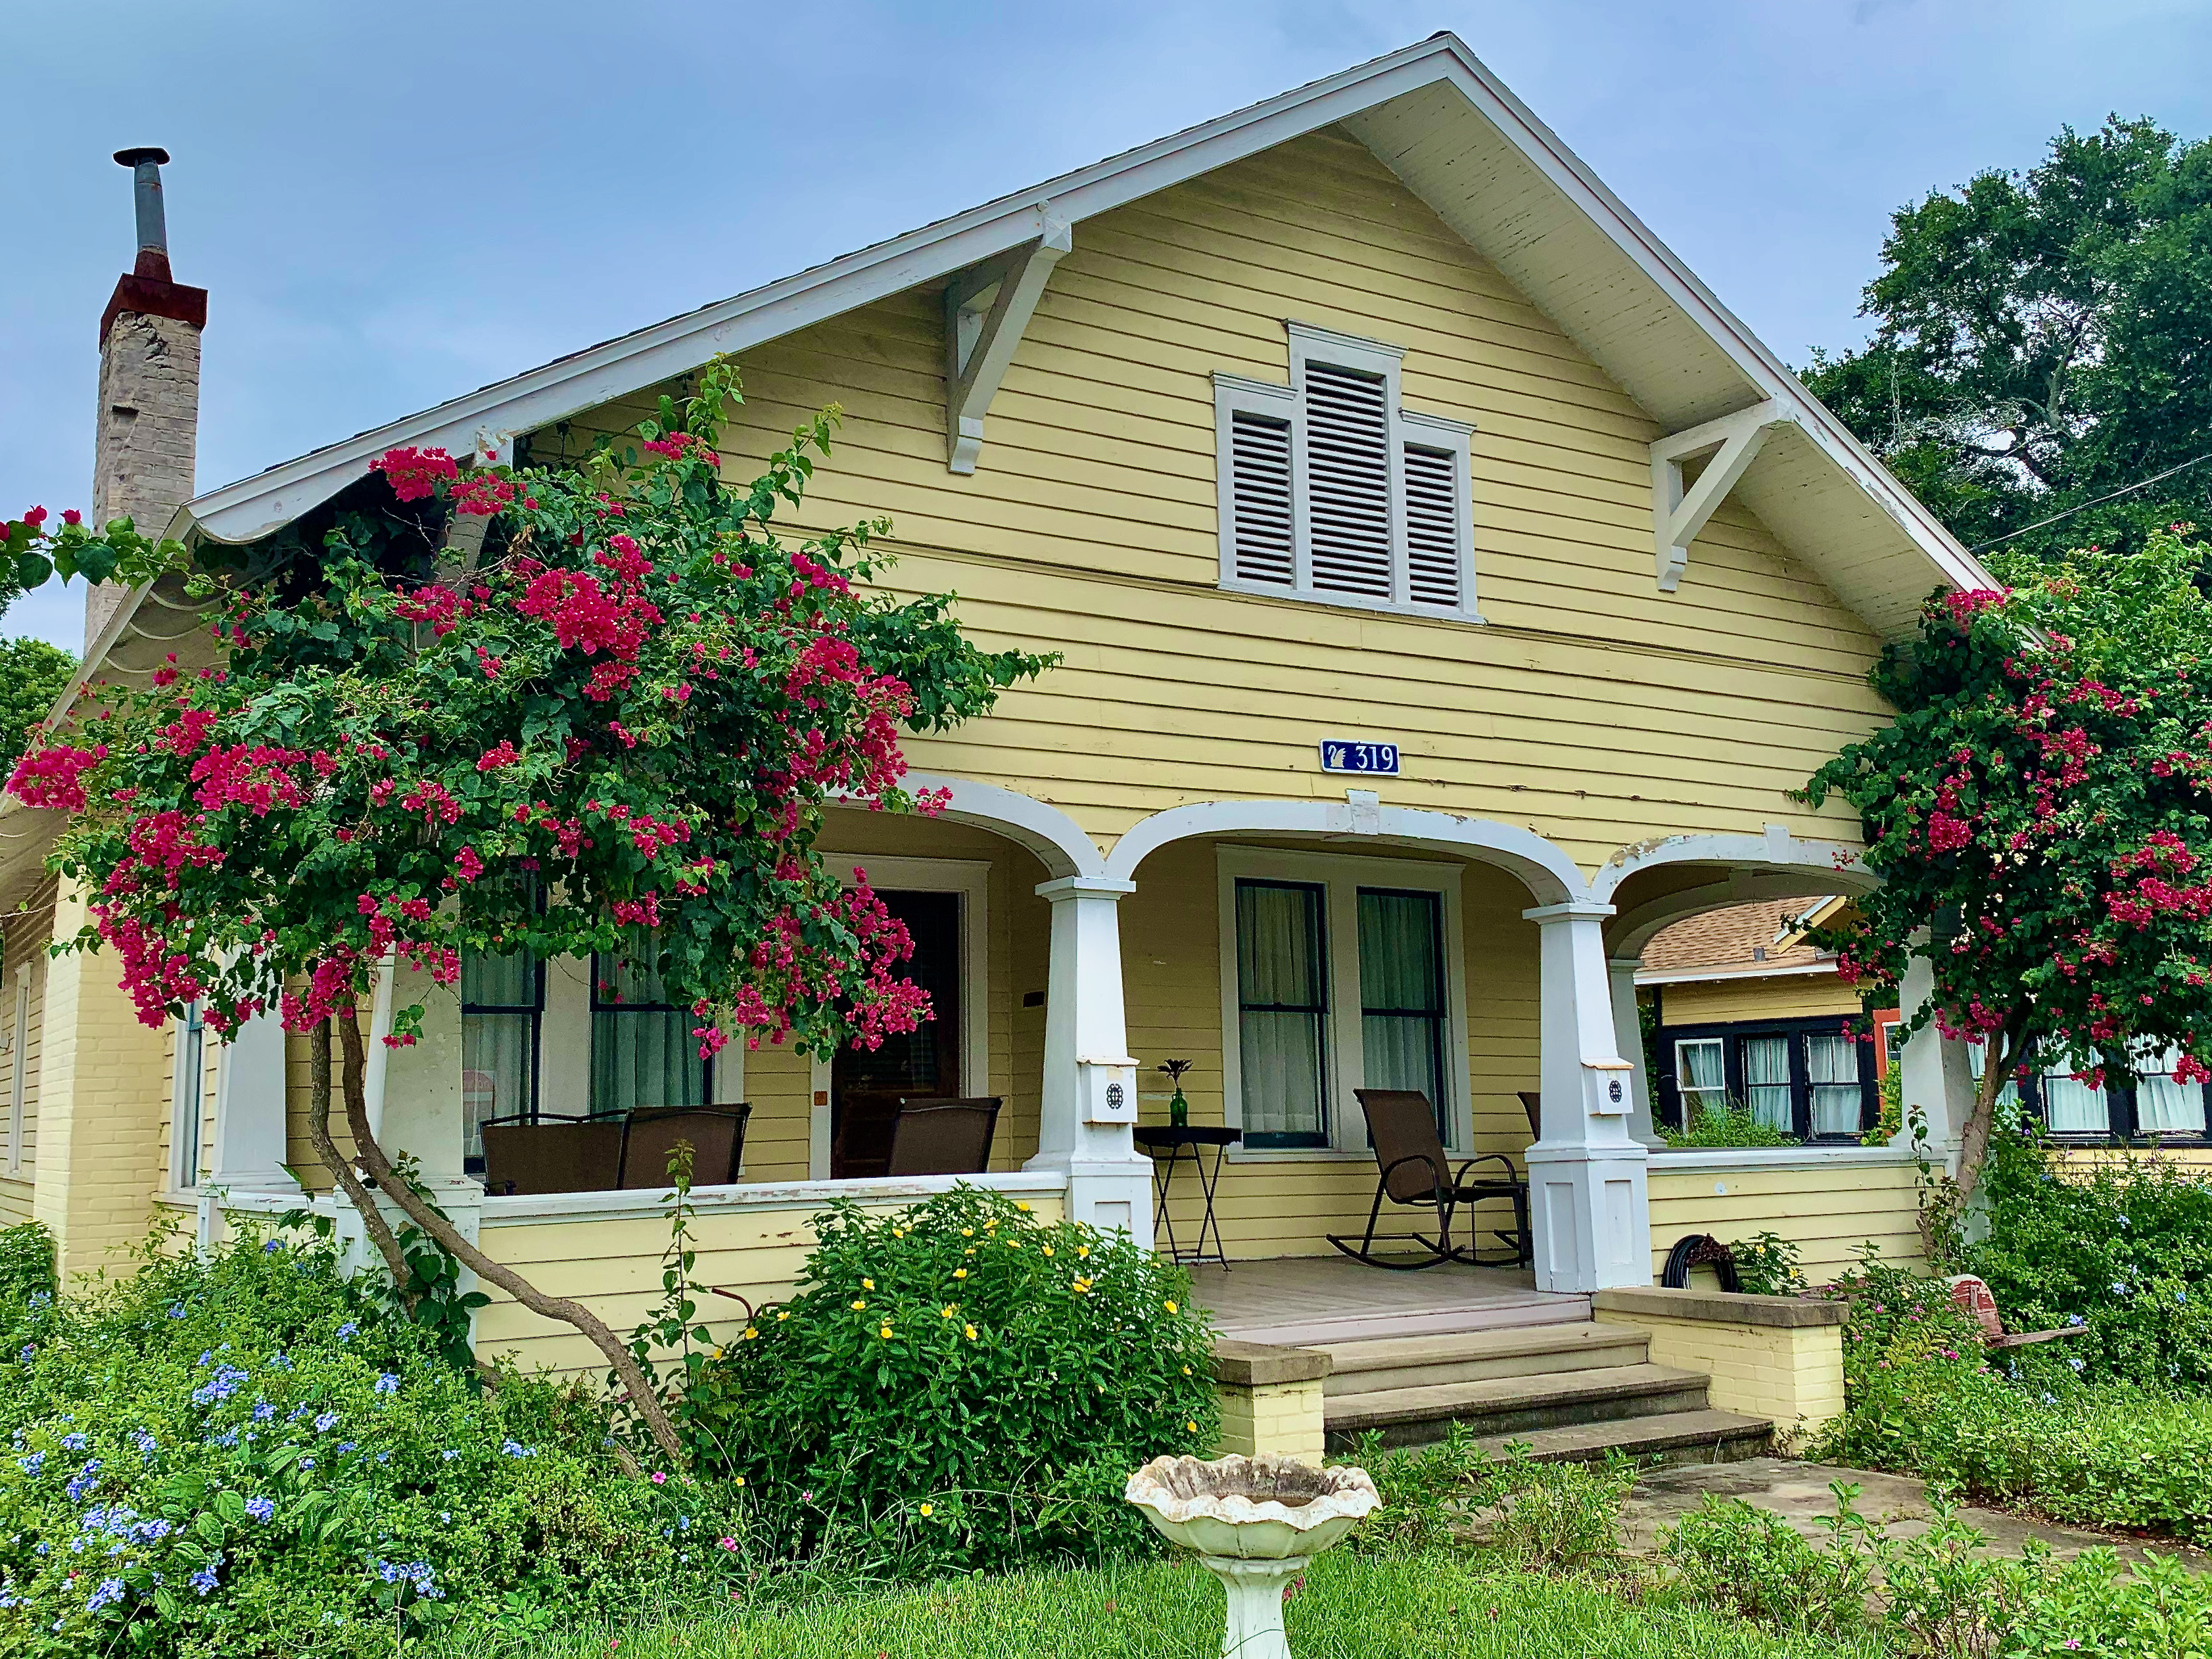 Built in 1901, the classic Craftsman bungalow at 319 Lake Avenue is one of Lakeland's cherished "Century Homes."